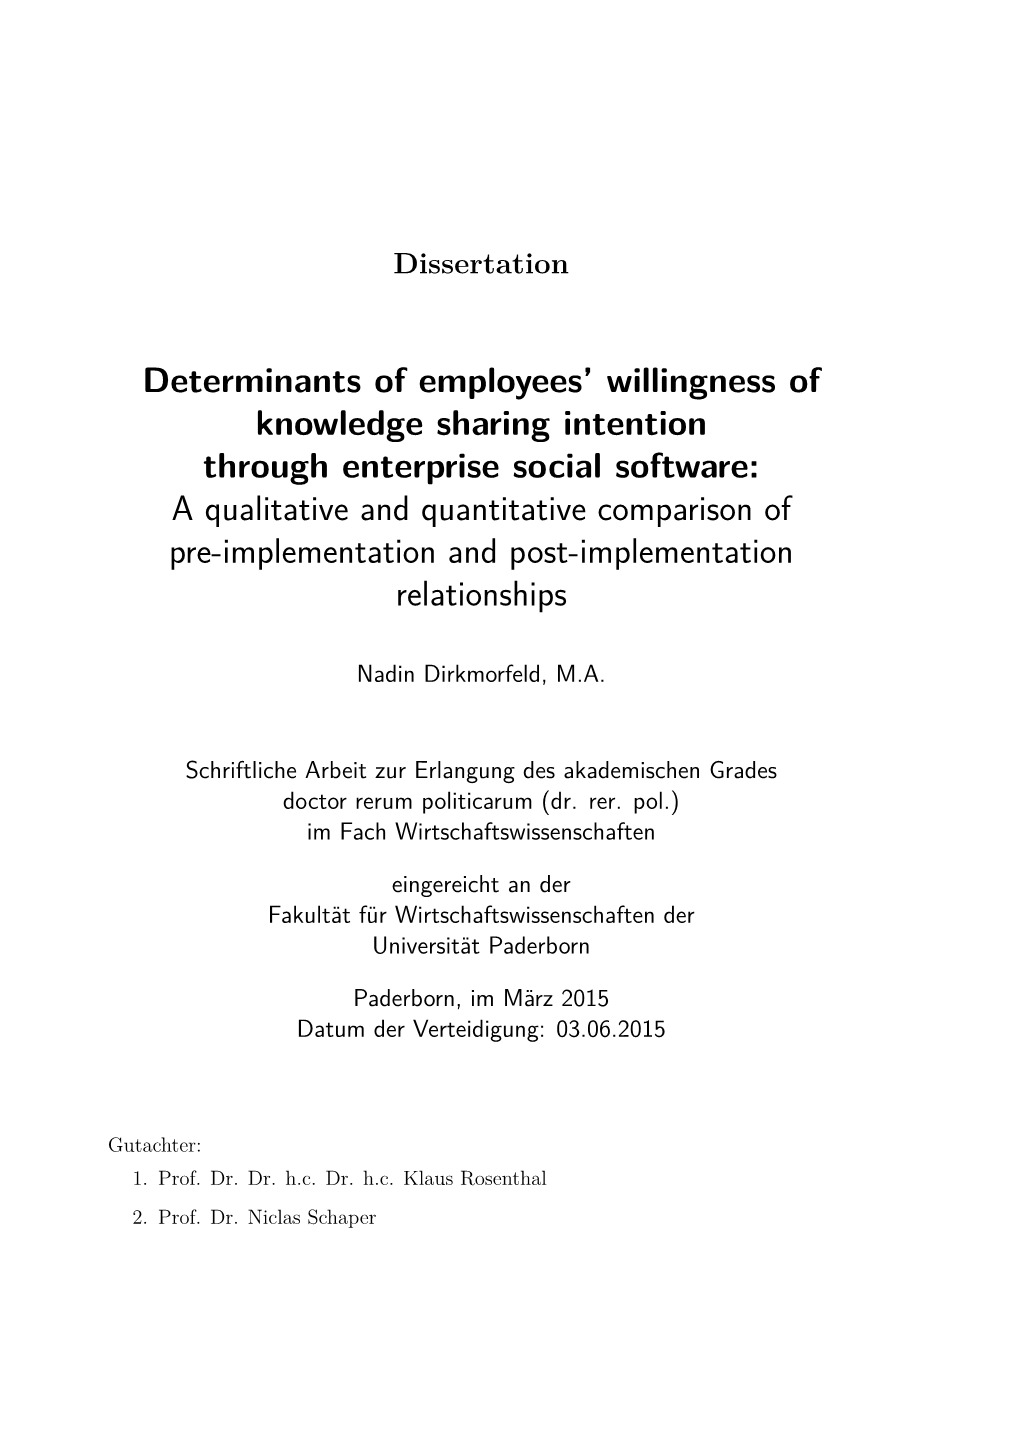 Determinants of Employees' Willingness of Knowledge Sharing